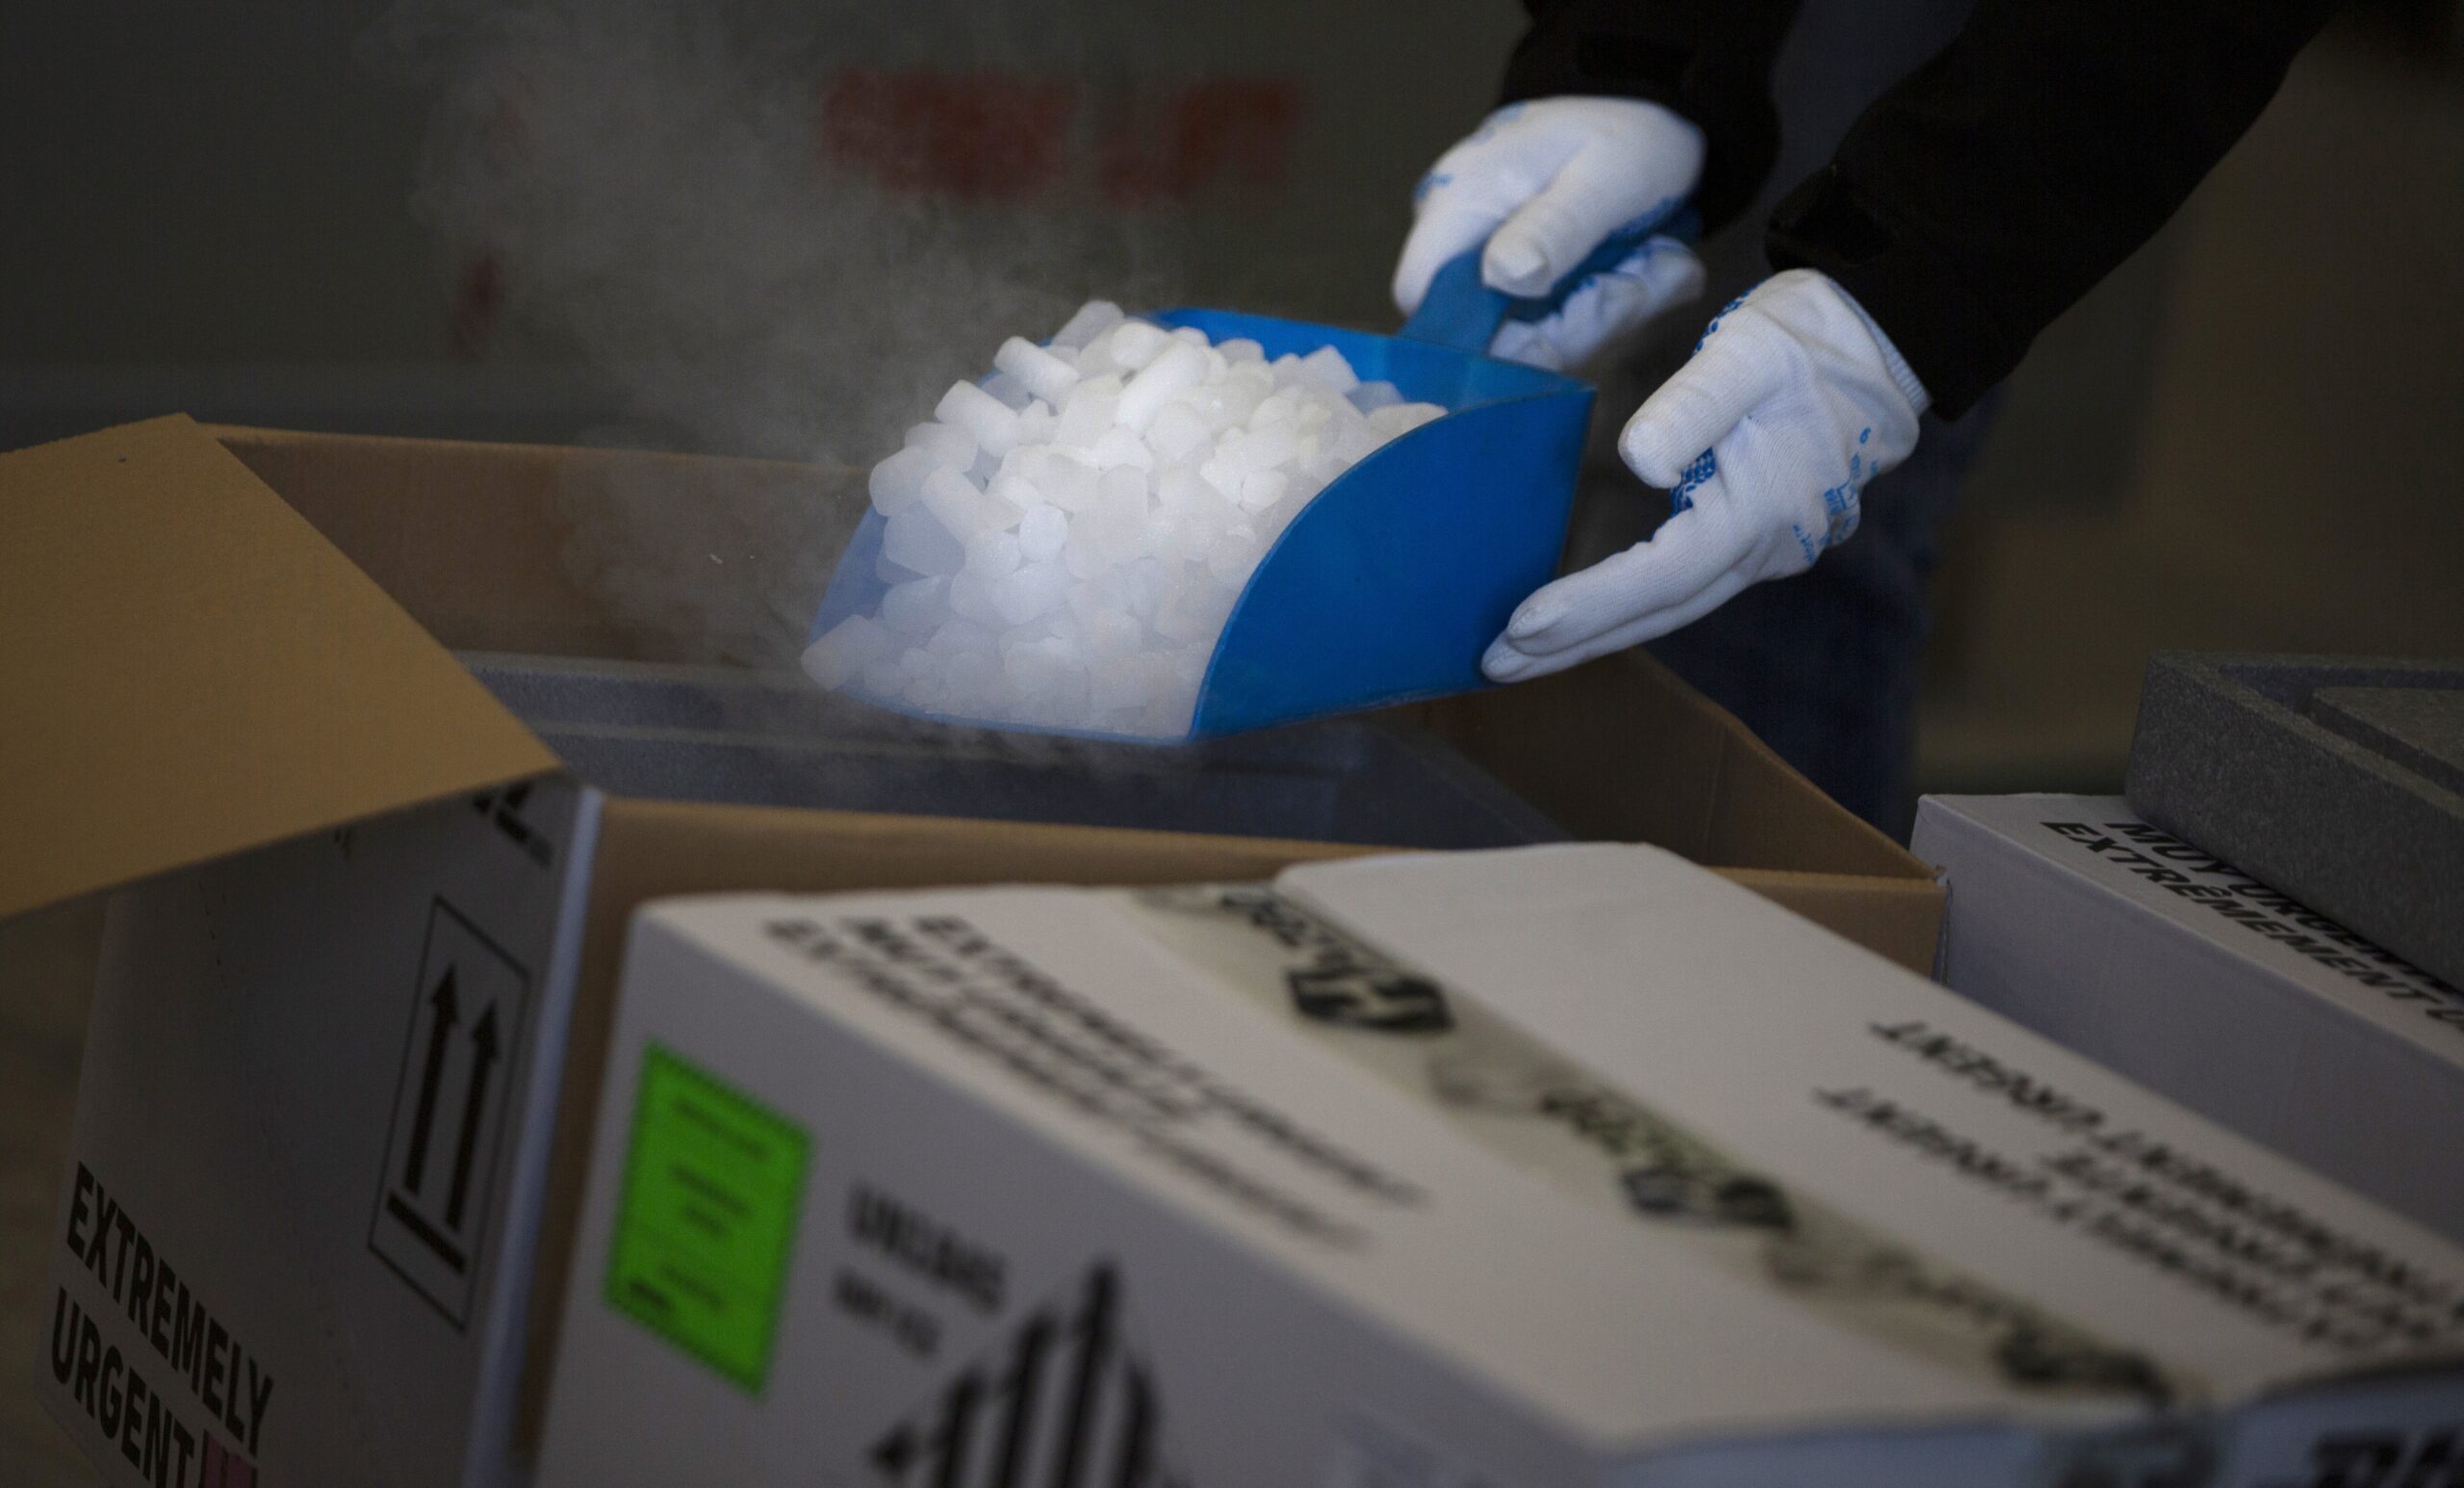 A worker shows how dry ice is used on specific vaccines